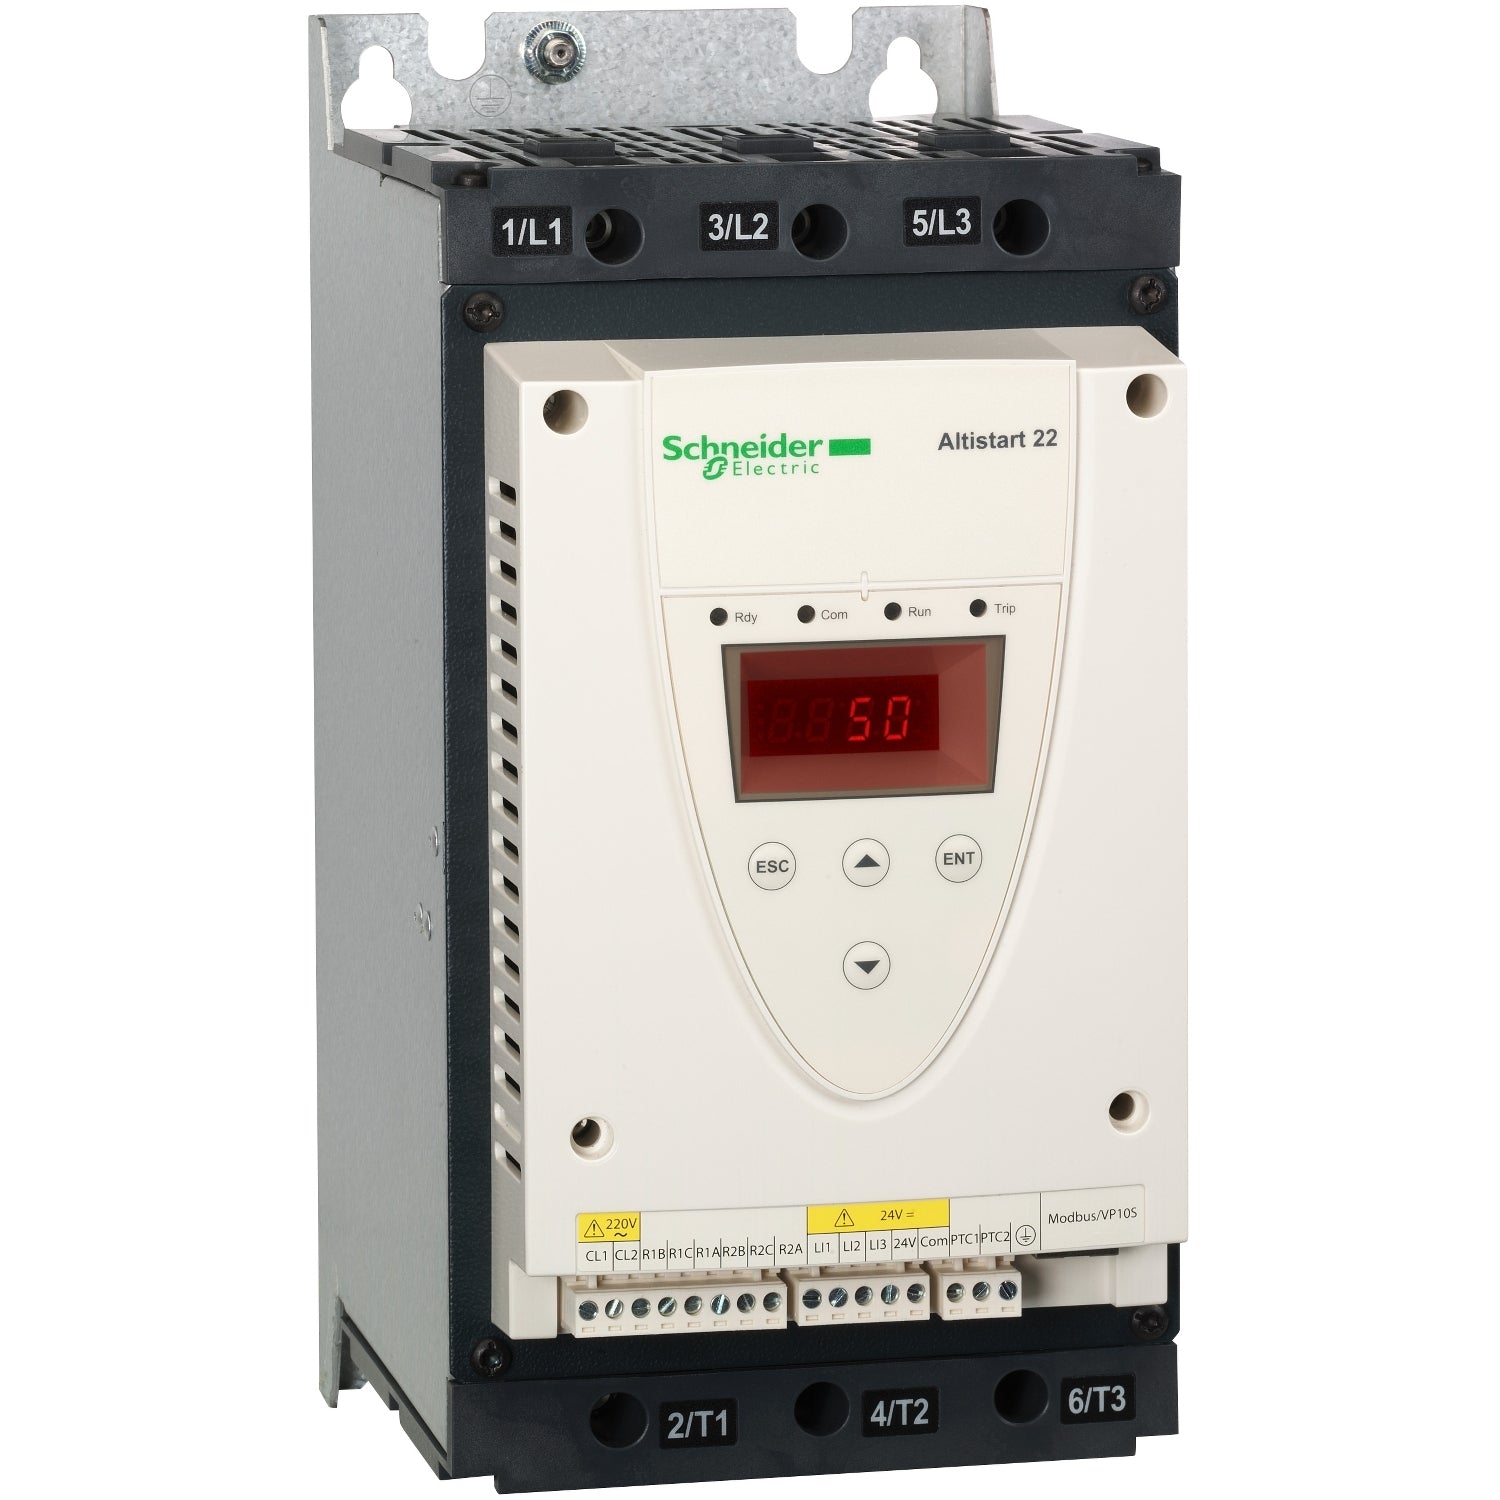 ATS22D88S6U | Schneider Electric Soft starter for asynchronous motor, Altistart 22, control 110V, 208 to 575V, 25 to 75hp